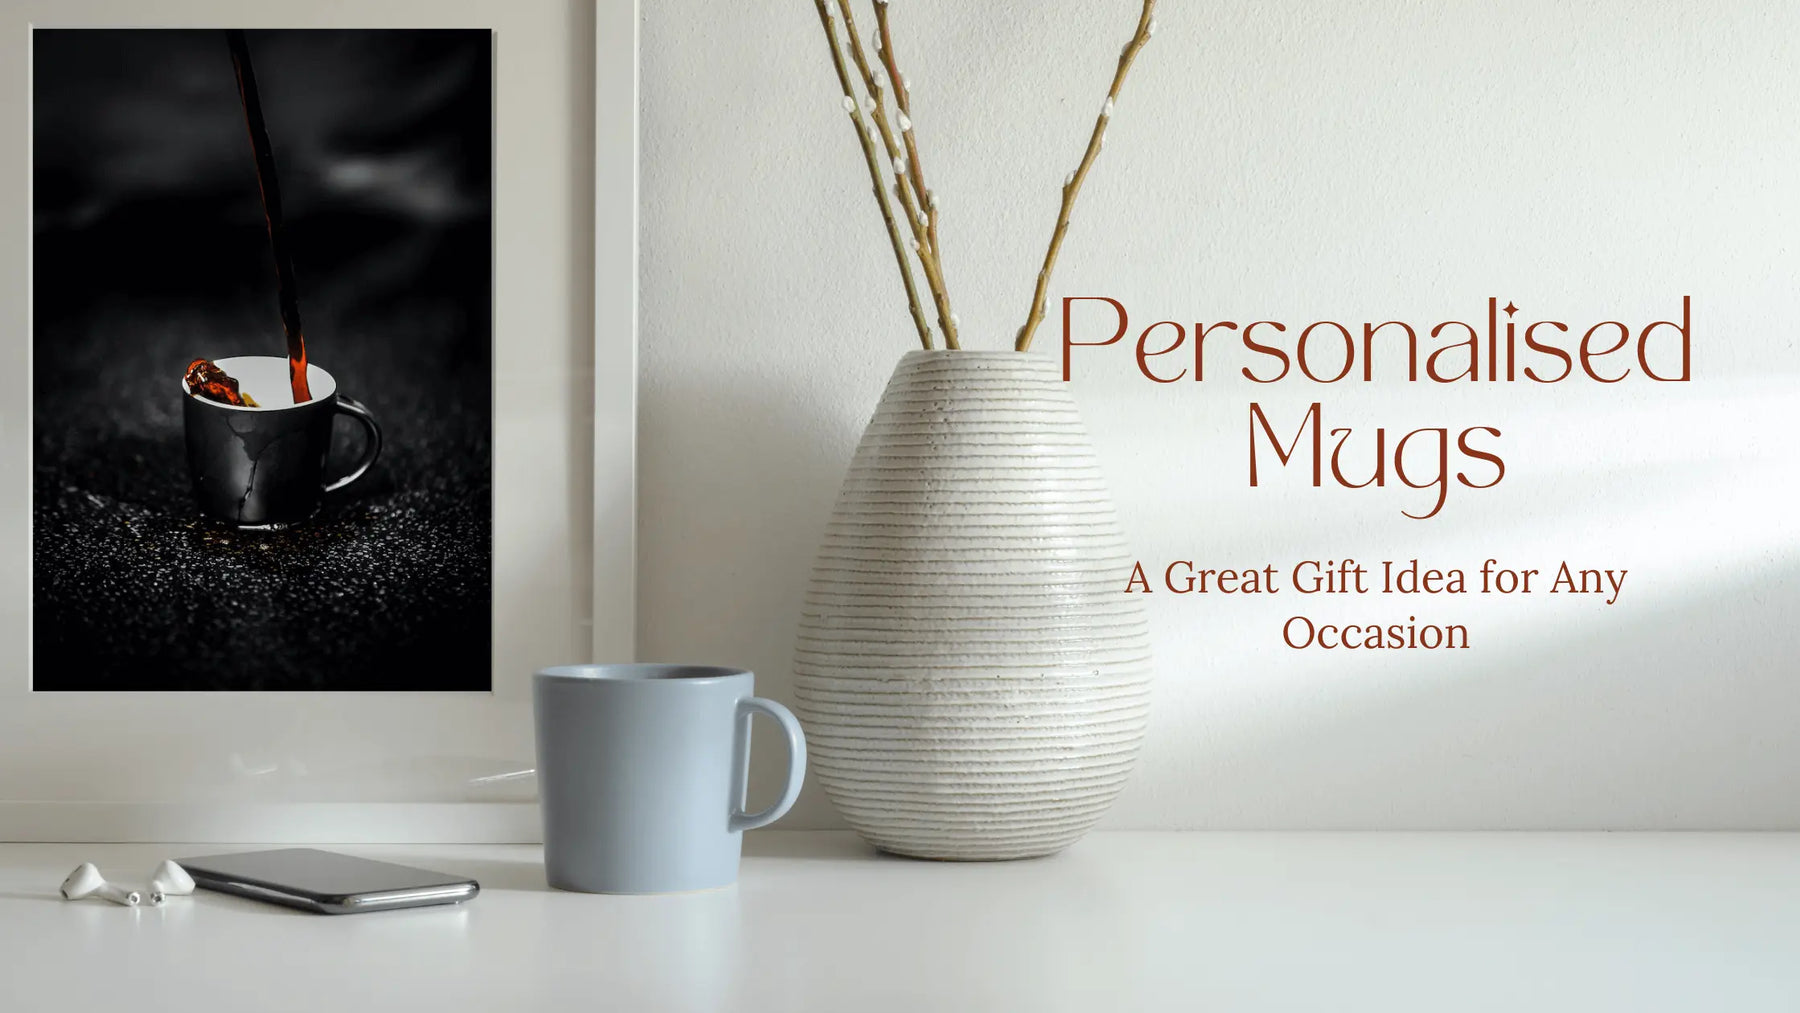 Personalised Mugs: A Great Gift Idea for Any Occasion